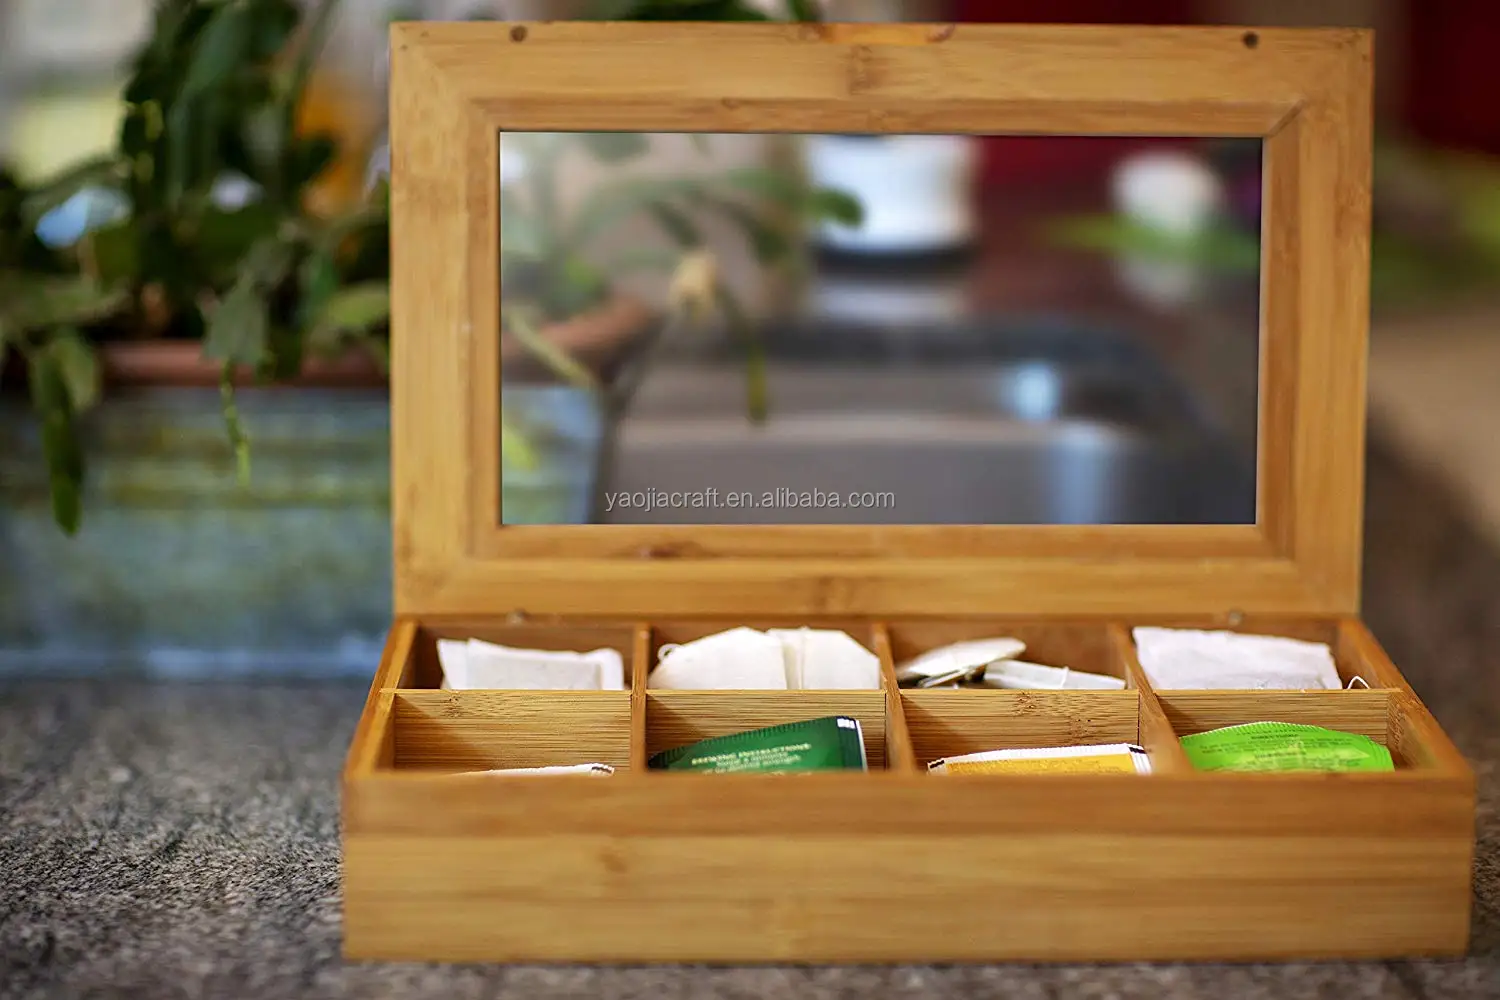 Details about   Tea Bag Organizer Bamboo Storage Box Holder 8 Sections Glass Display Chest 